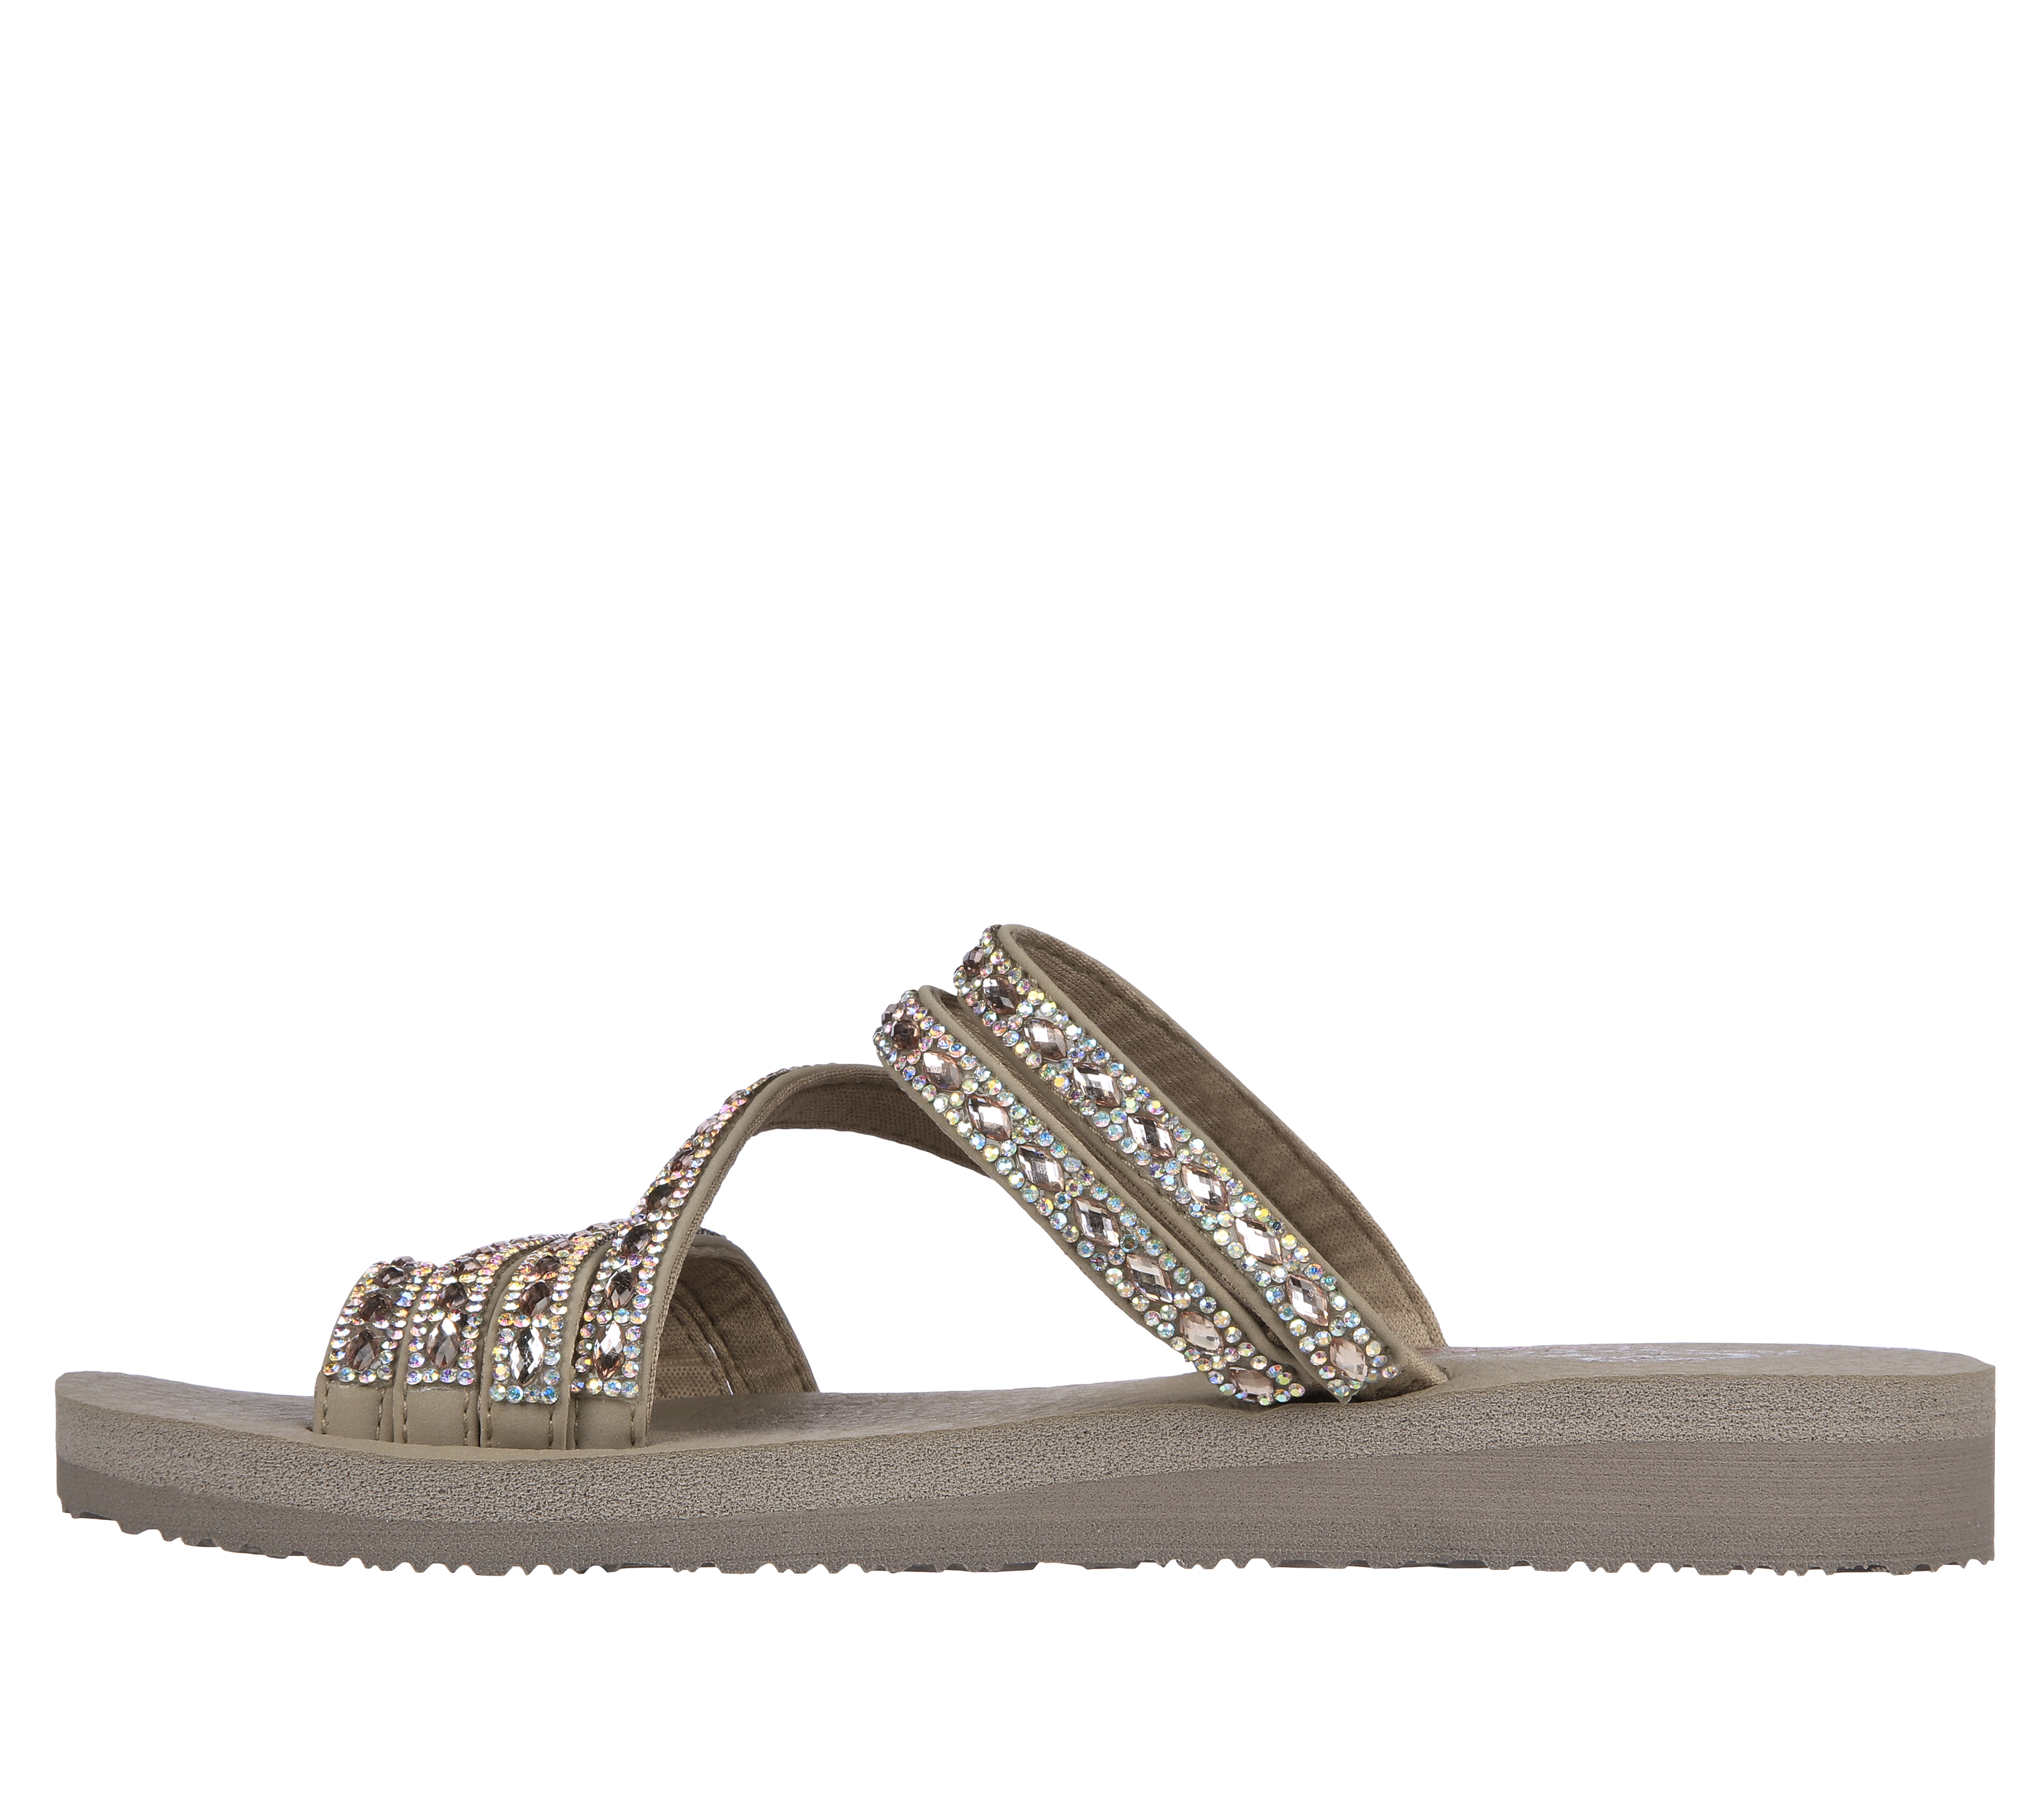 Buy Skechers Natural Meditation Womens Sandals from the Next UK online shop